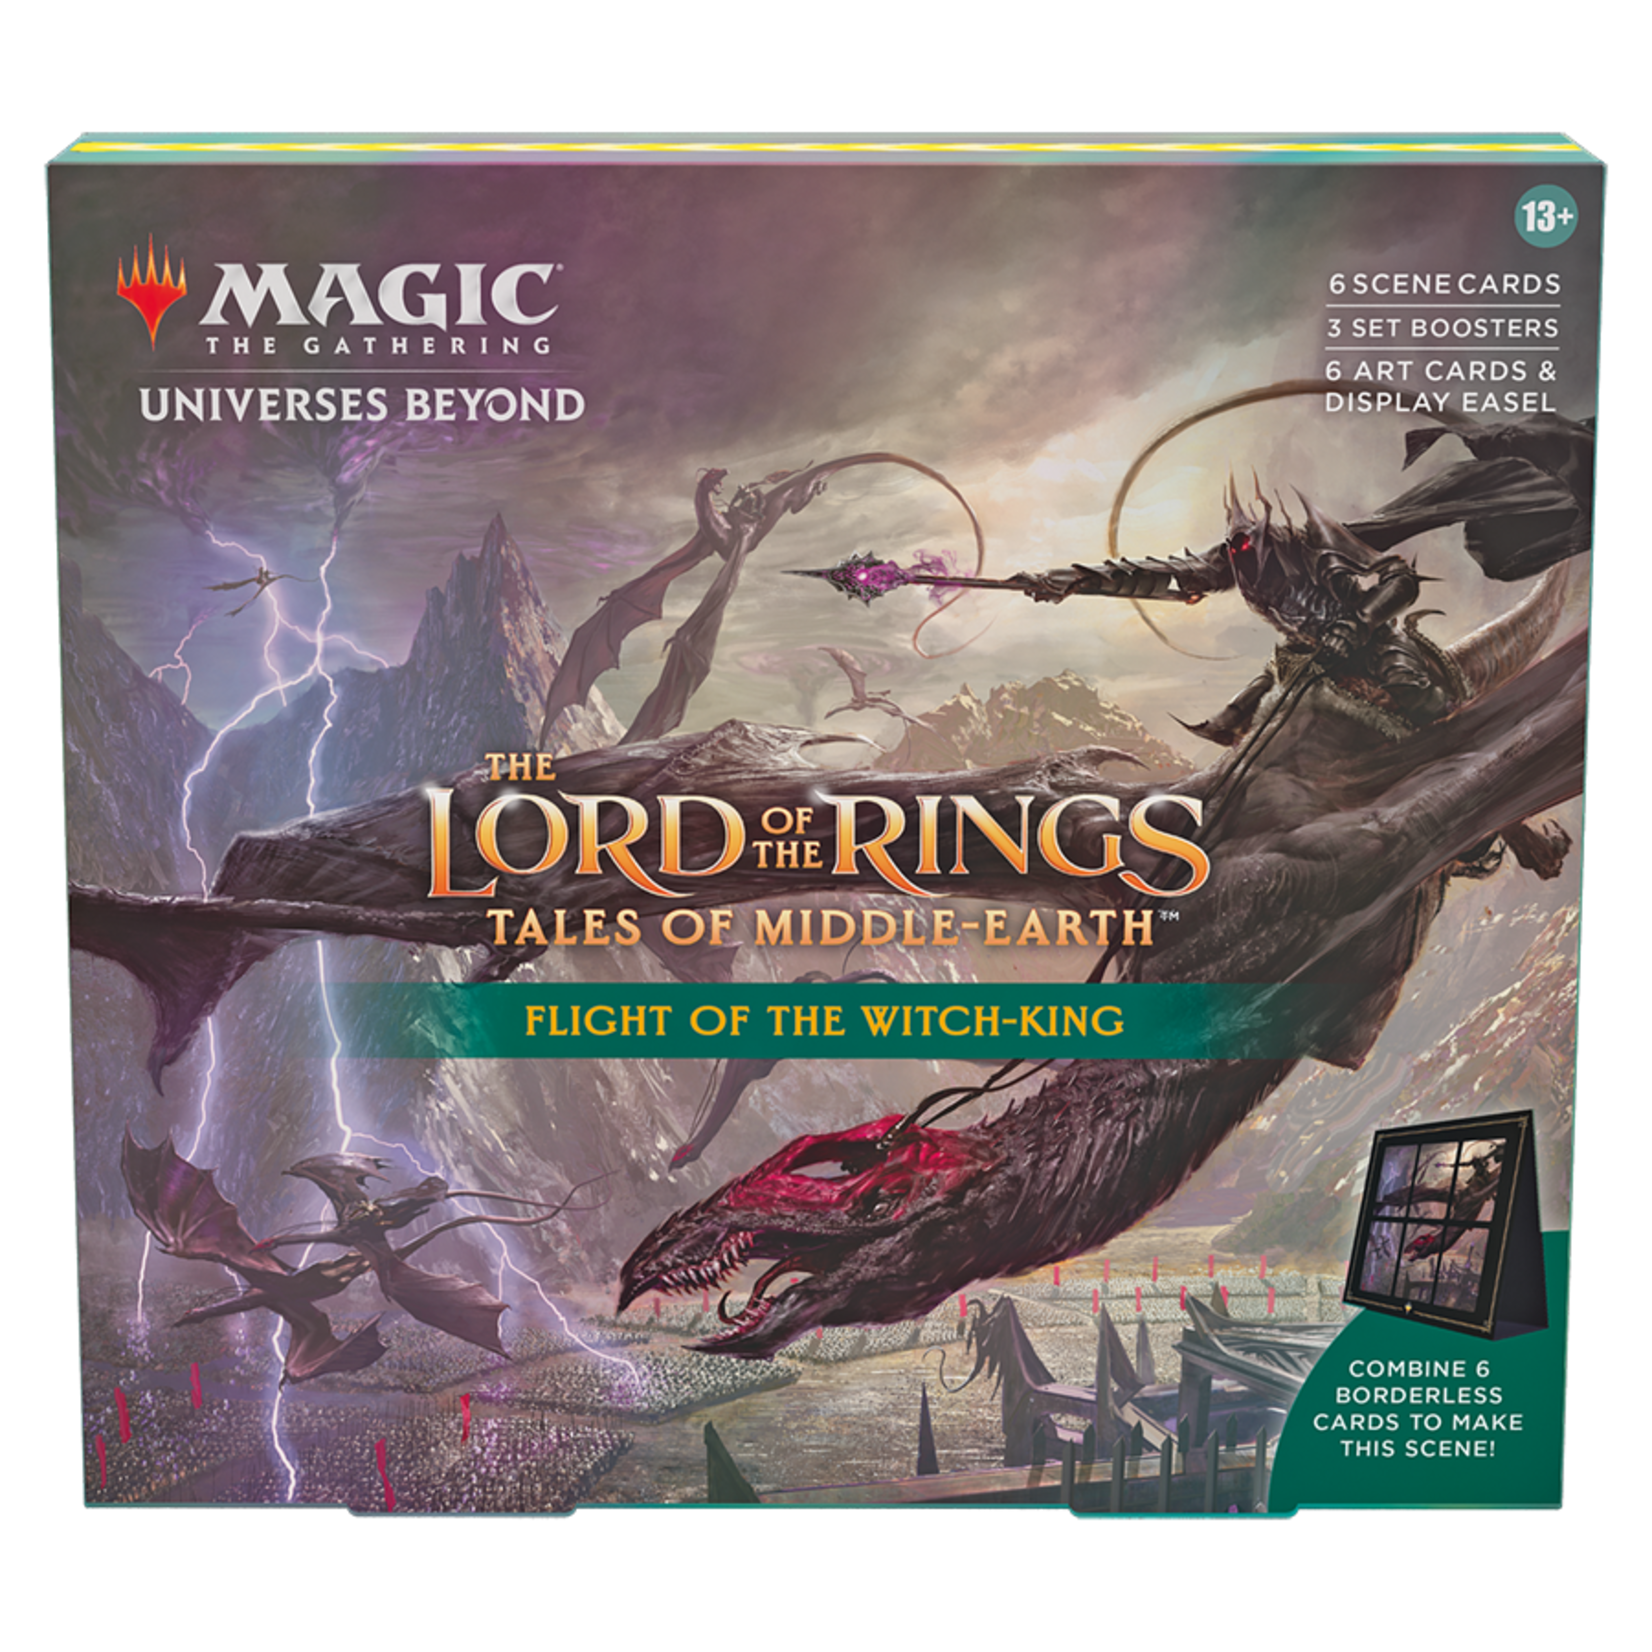 Wizards of the Coast The Lord of the Rings Tales of Middle-Earth - Flight of the Witch King Scene Box